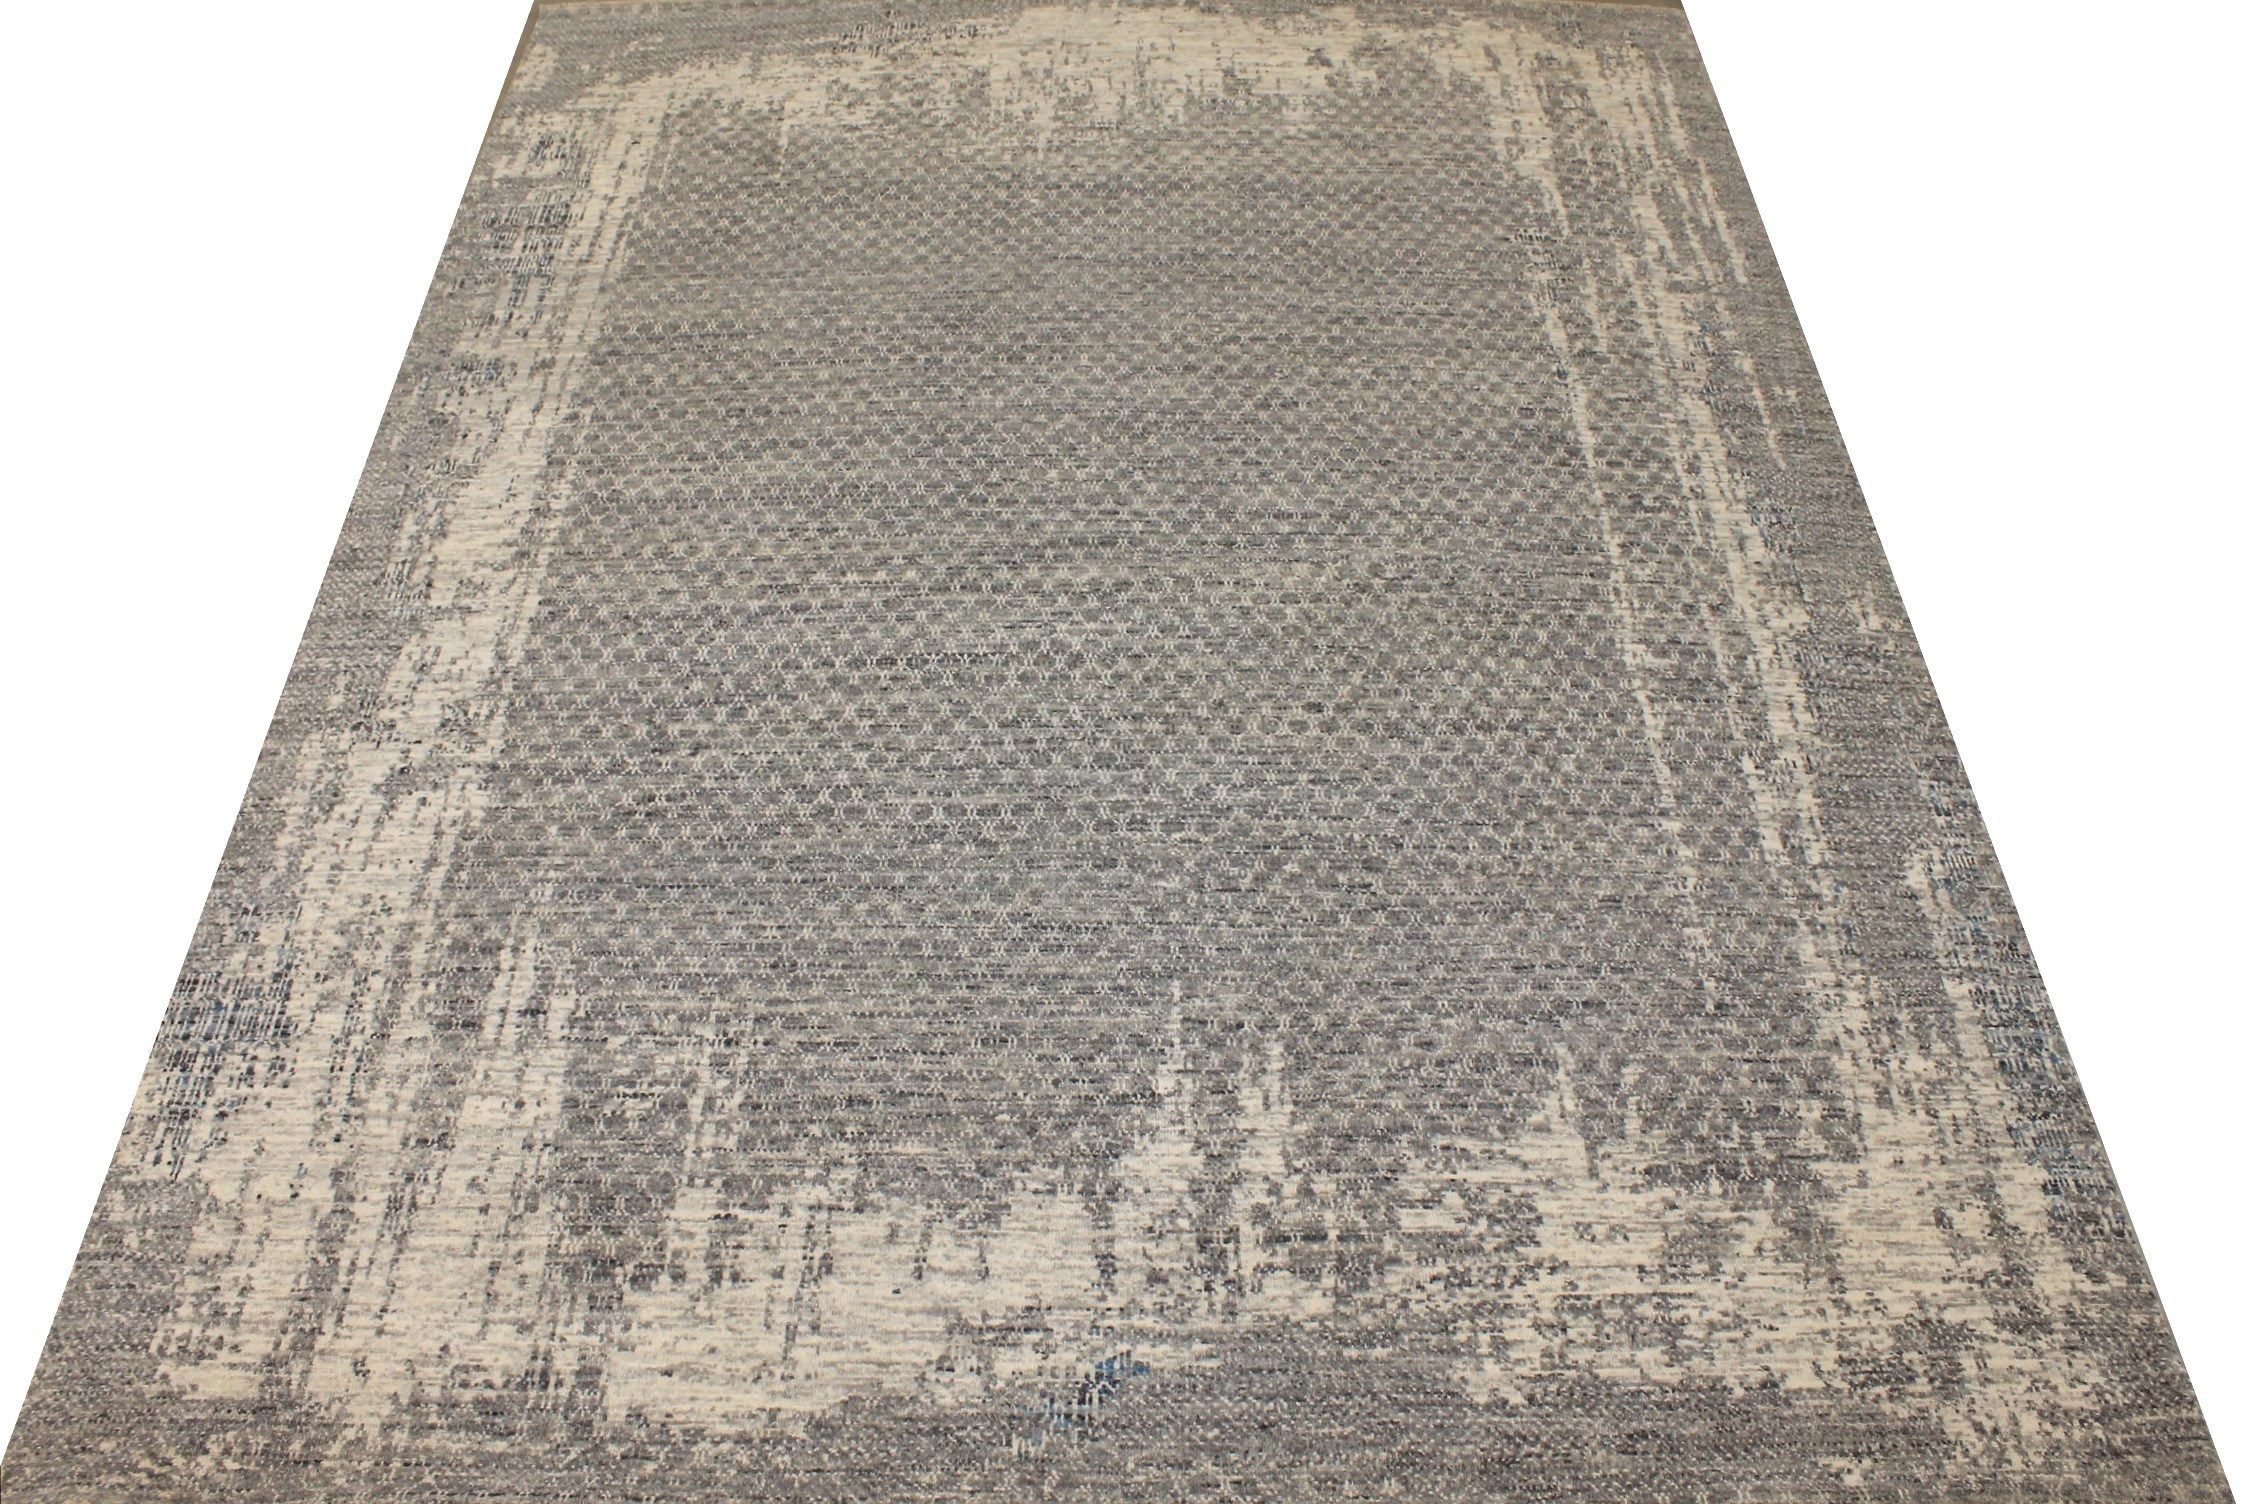 8x10 Modern Hand Knotted Wool Area Rug - MR027236